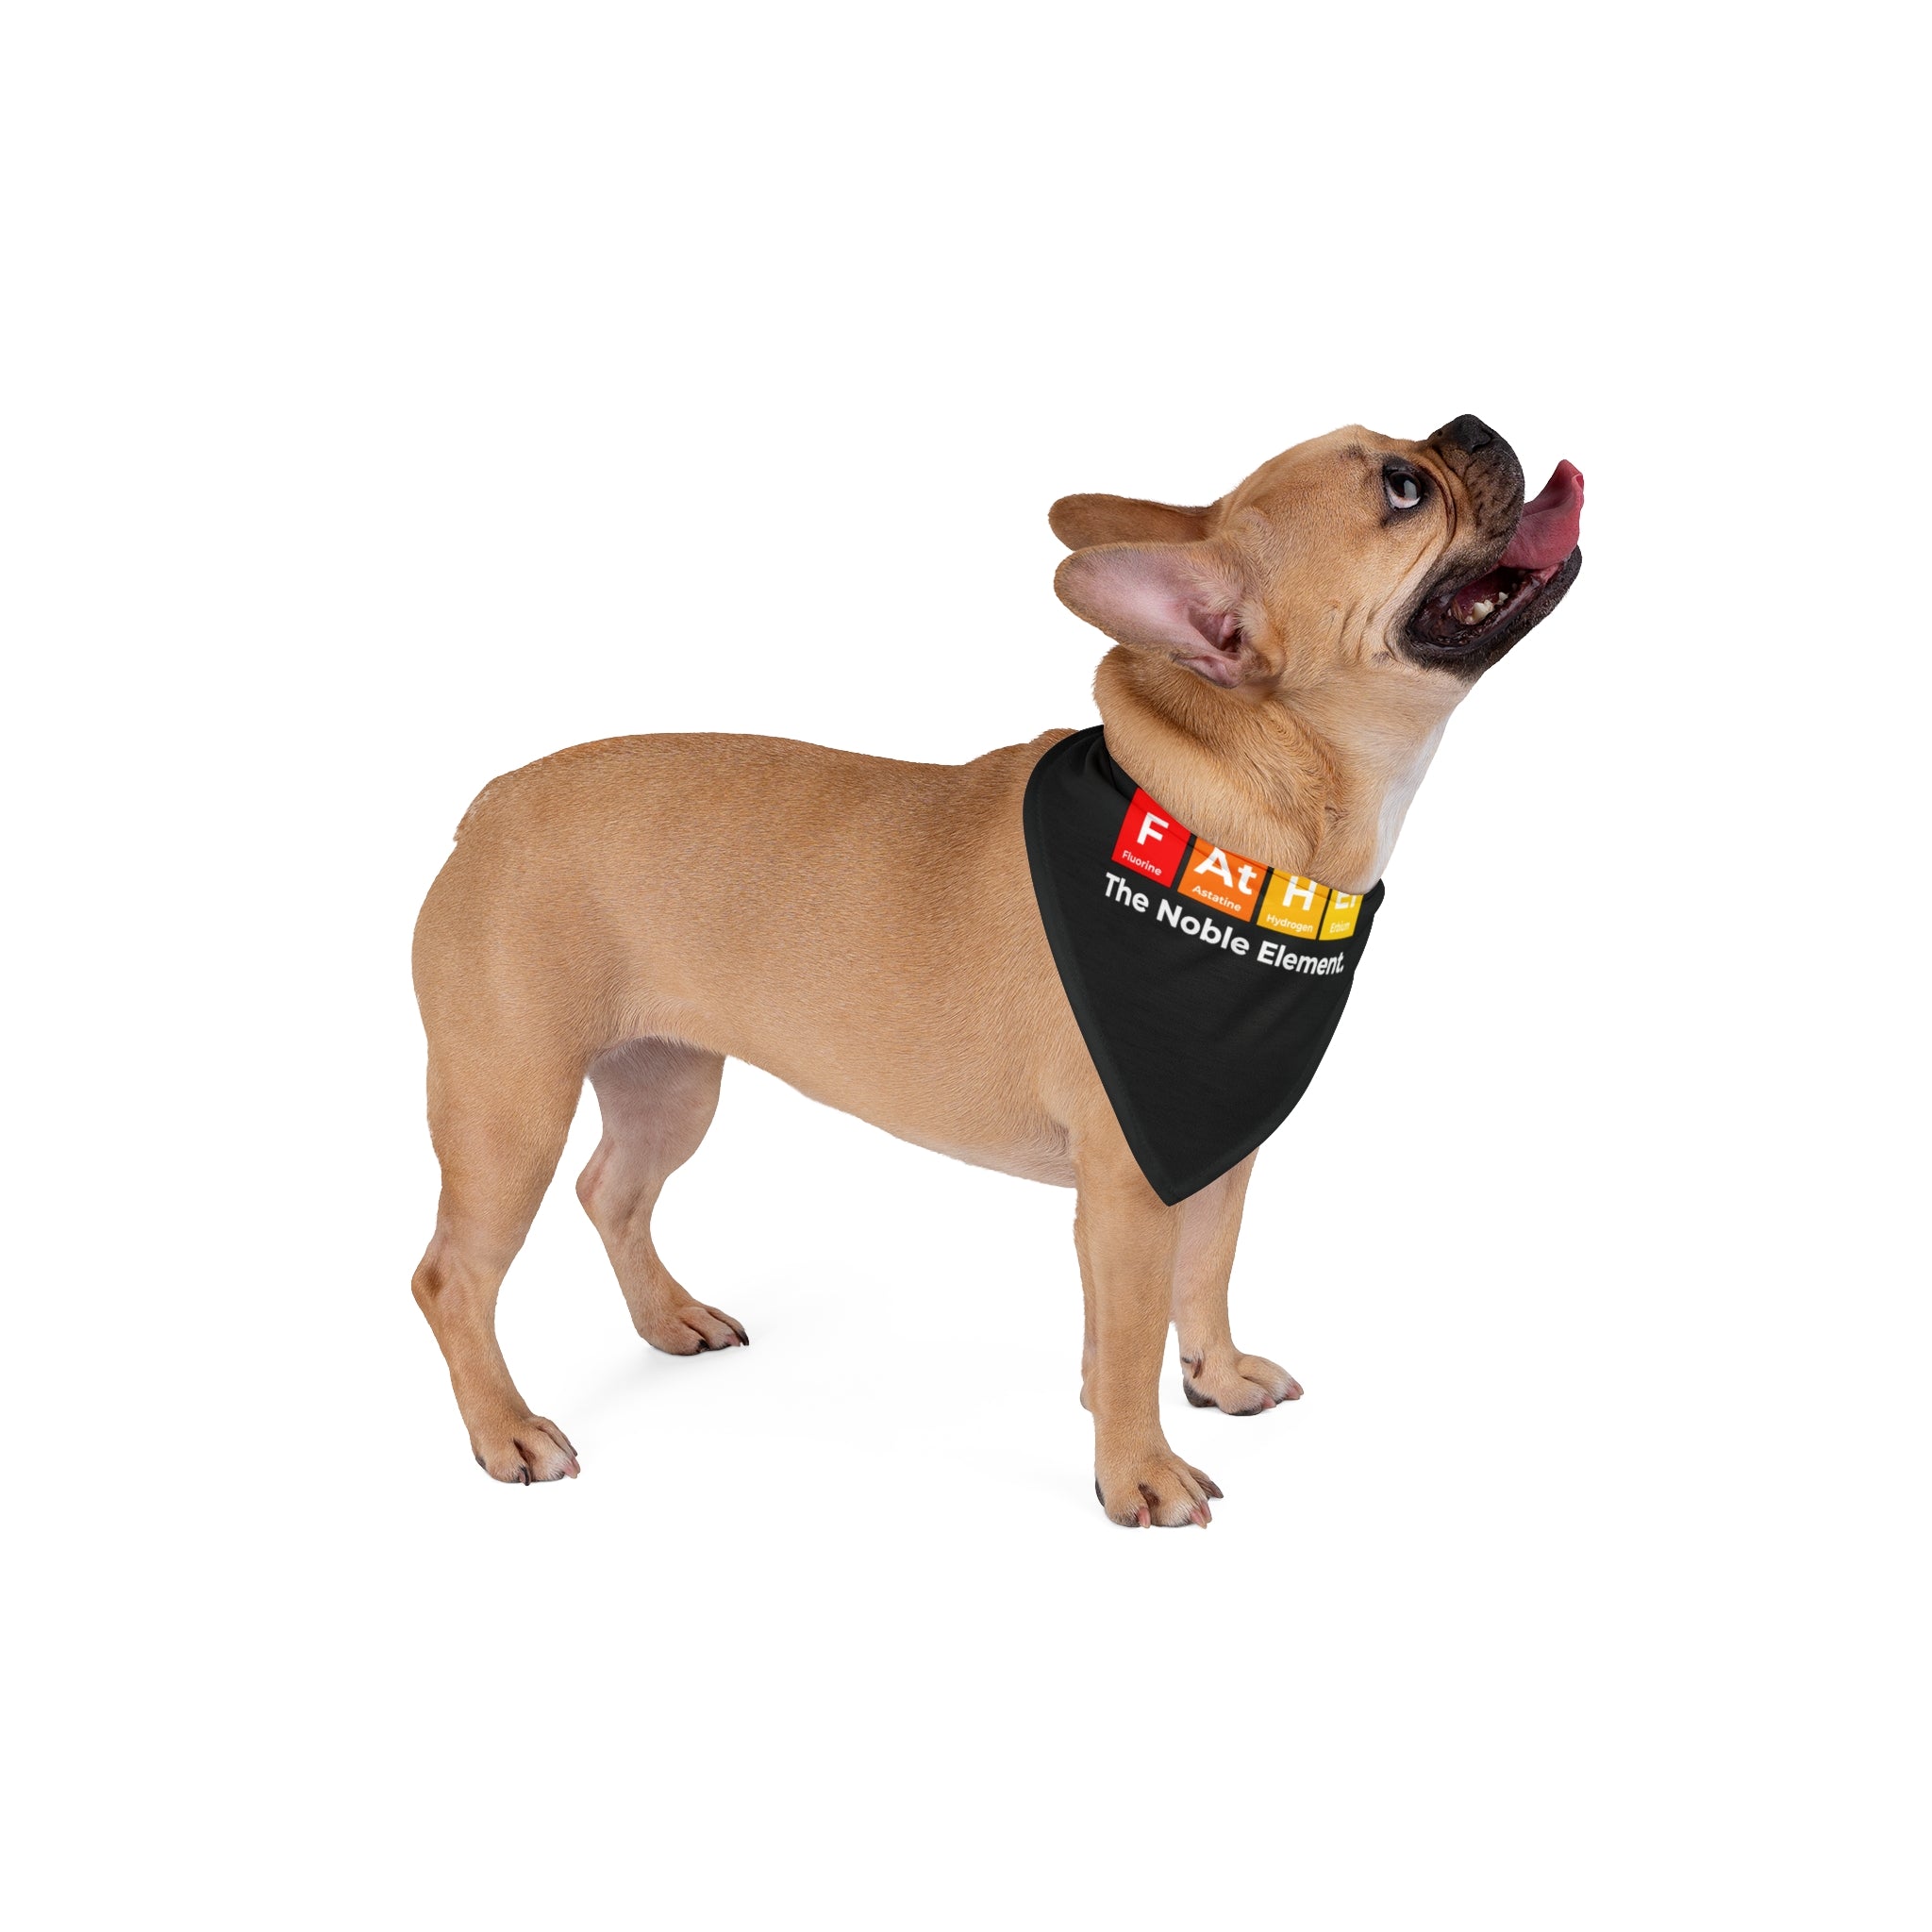 A tan French Bulldog wearing a Father Graphic - Pet Bandana— a black bandana adorned with colorful periodic table elements and the words "The Noble Elements." The dog is standing, looking upwards with its tongue out. Perfect for any proud Doggo Dad!